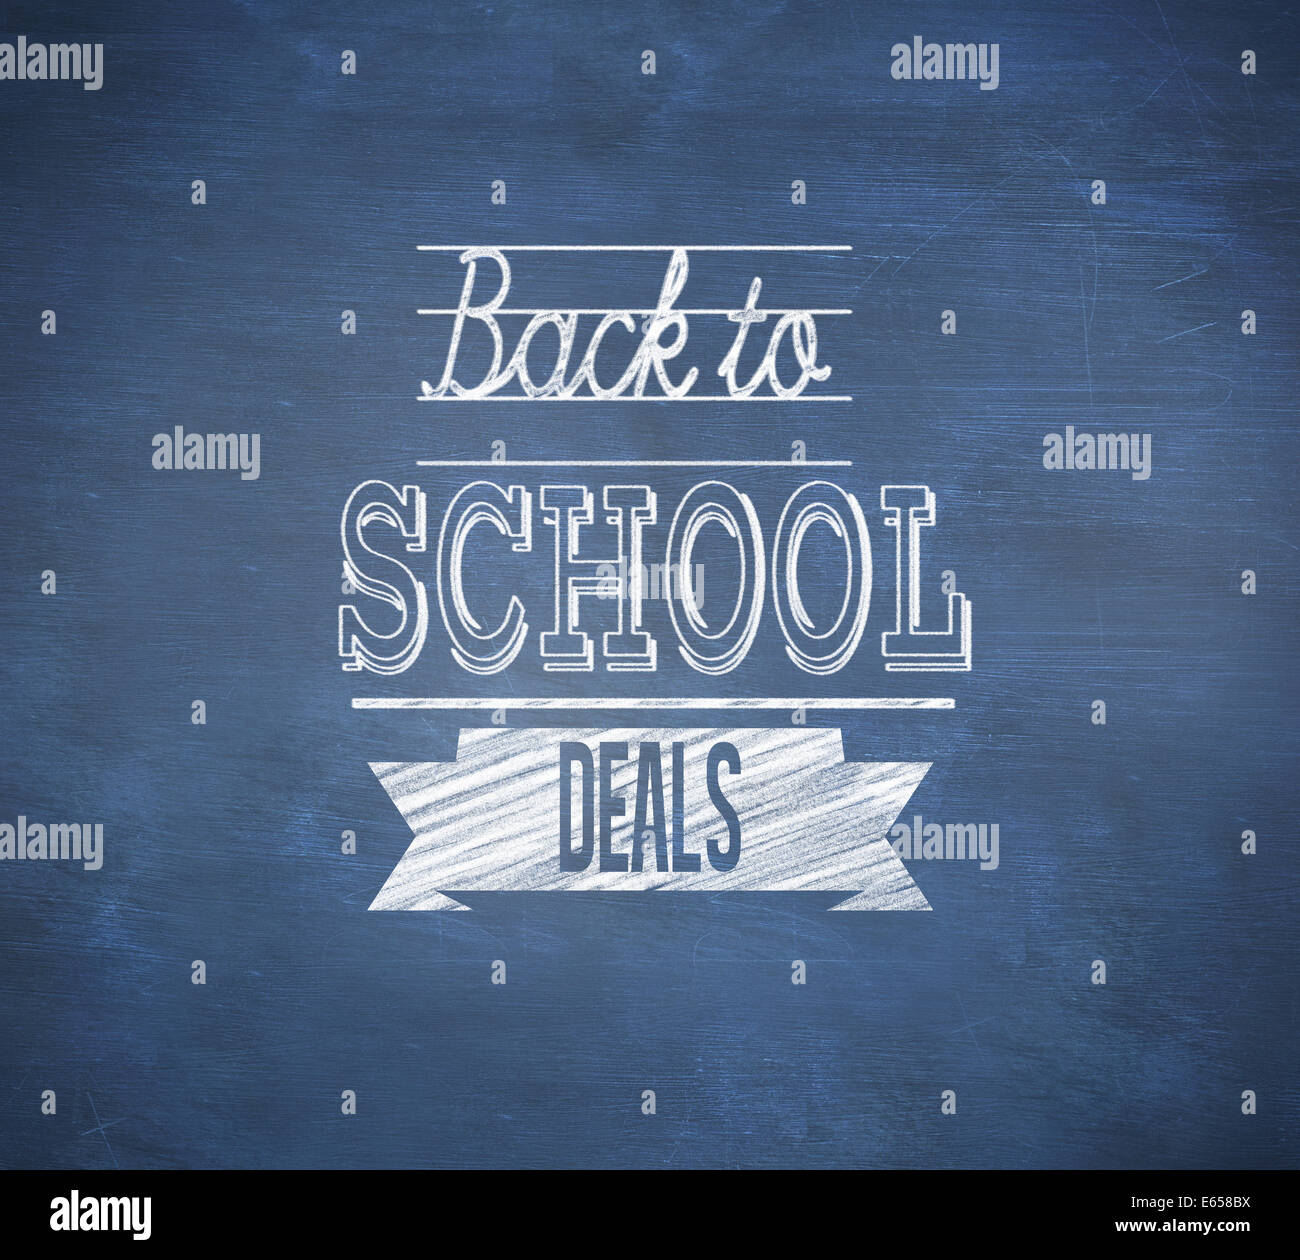 Composite image of back to school deals message Stock Photo